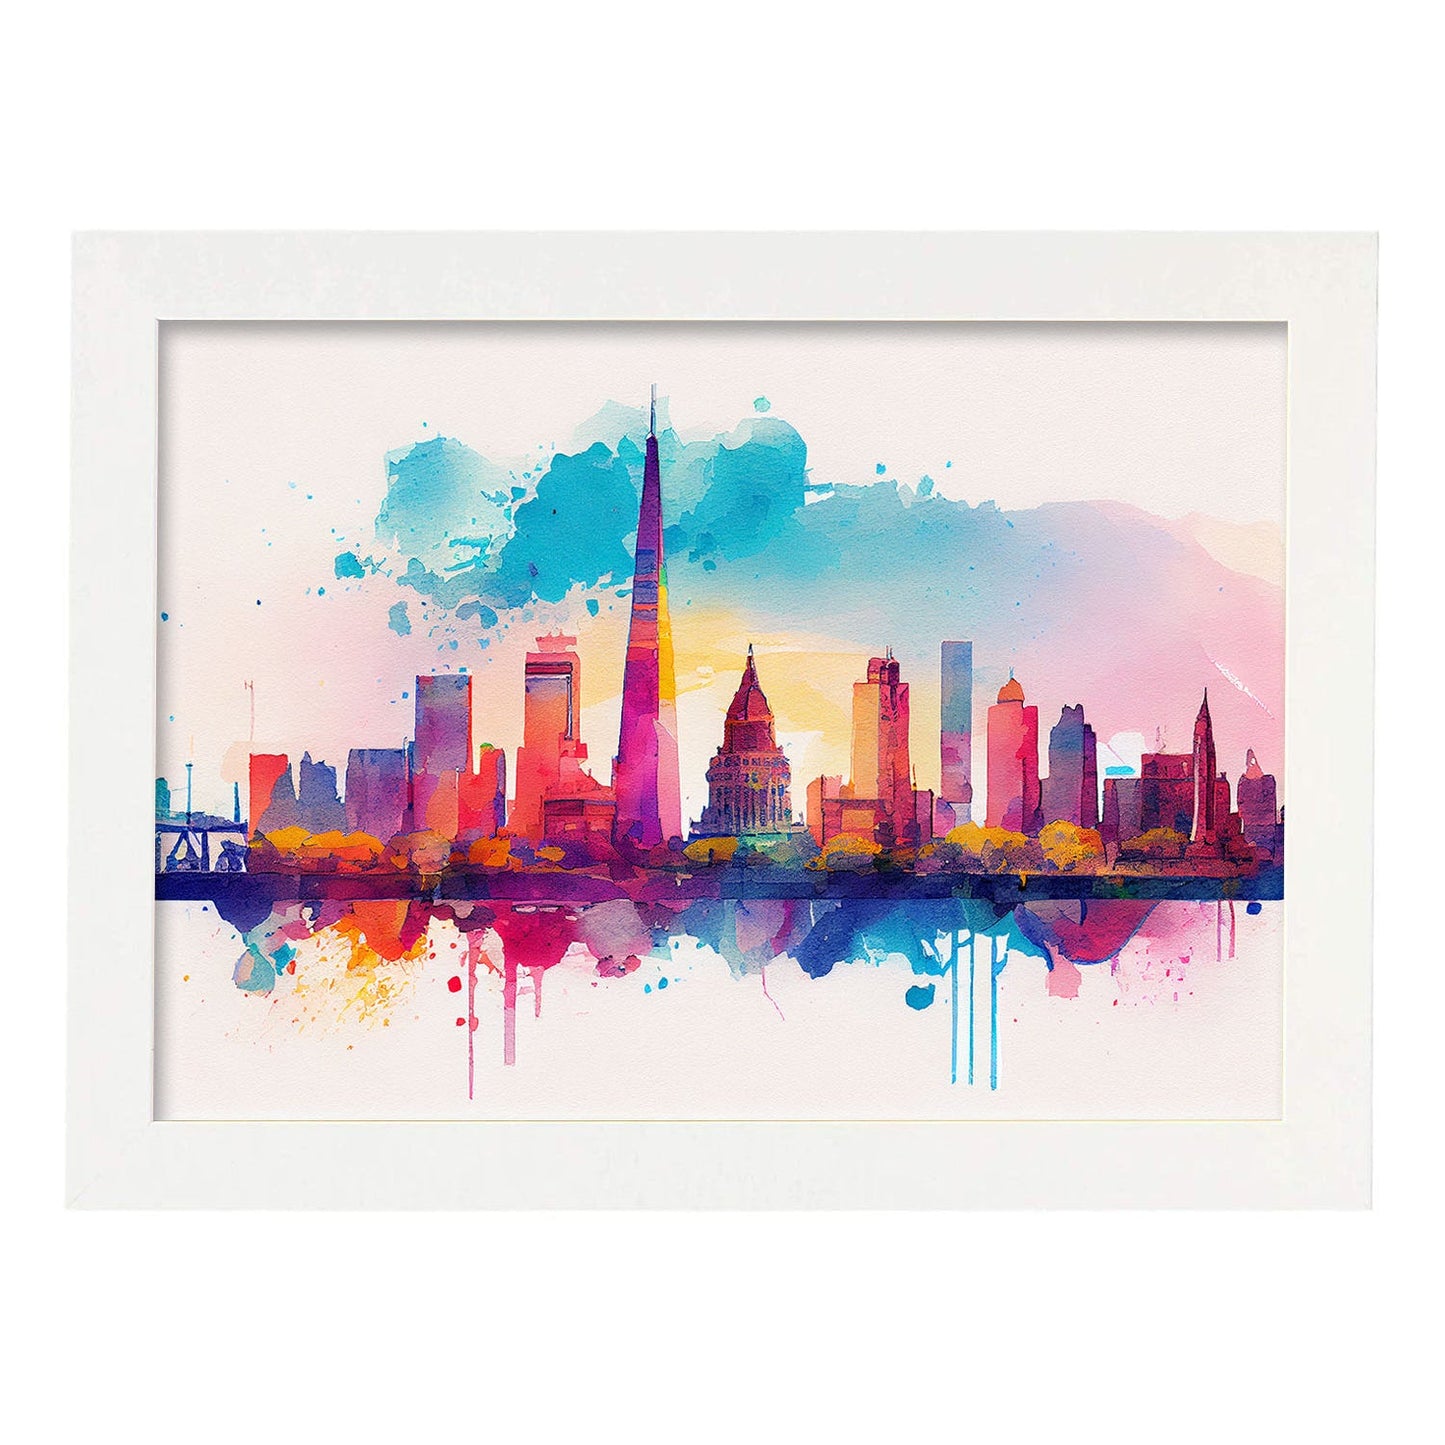 Nacnic watercolor of a skyline of the city of Buenos Aires_1. Aesthetic Wall Art Prints for Bedroom or Living Room Design.-Artwork-Nacnic-A4-Marco Blanco-Nacnic Estudio SL